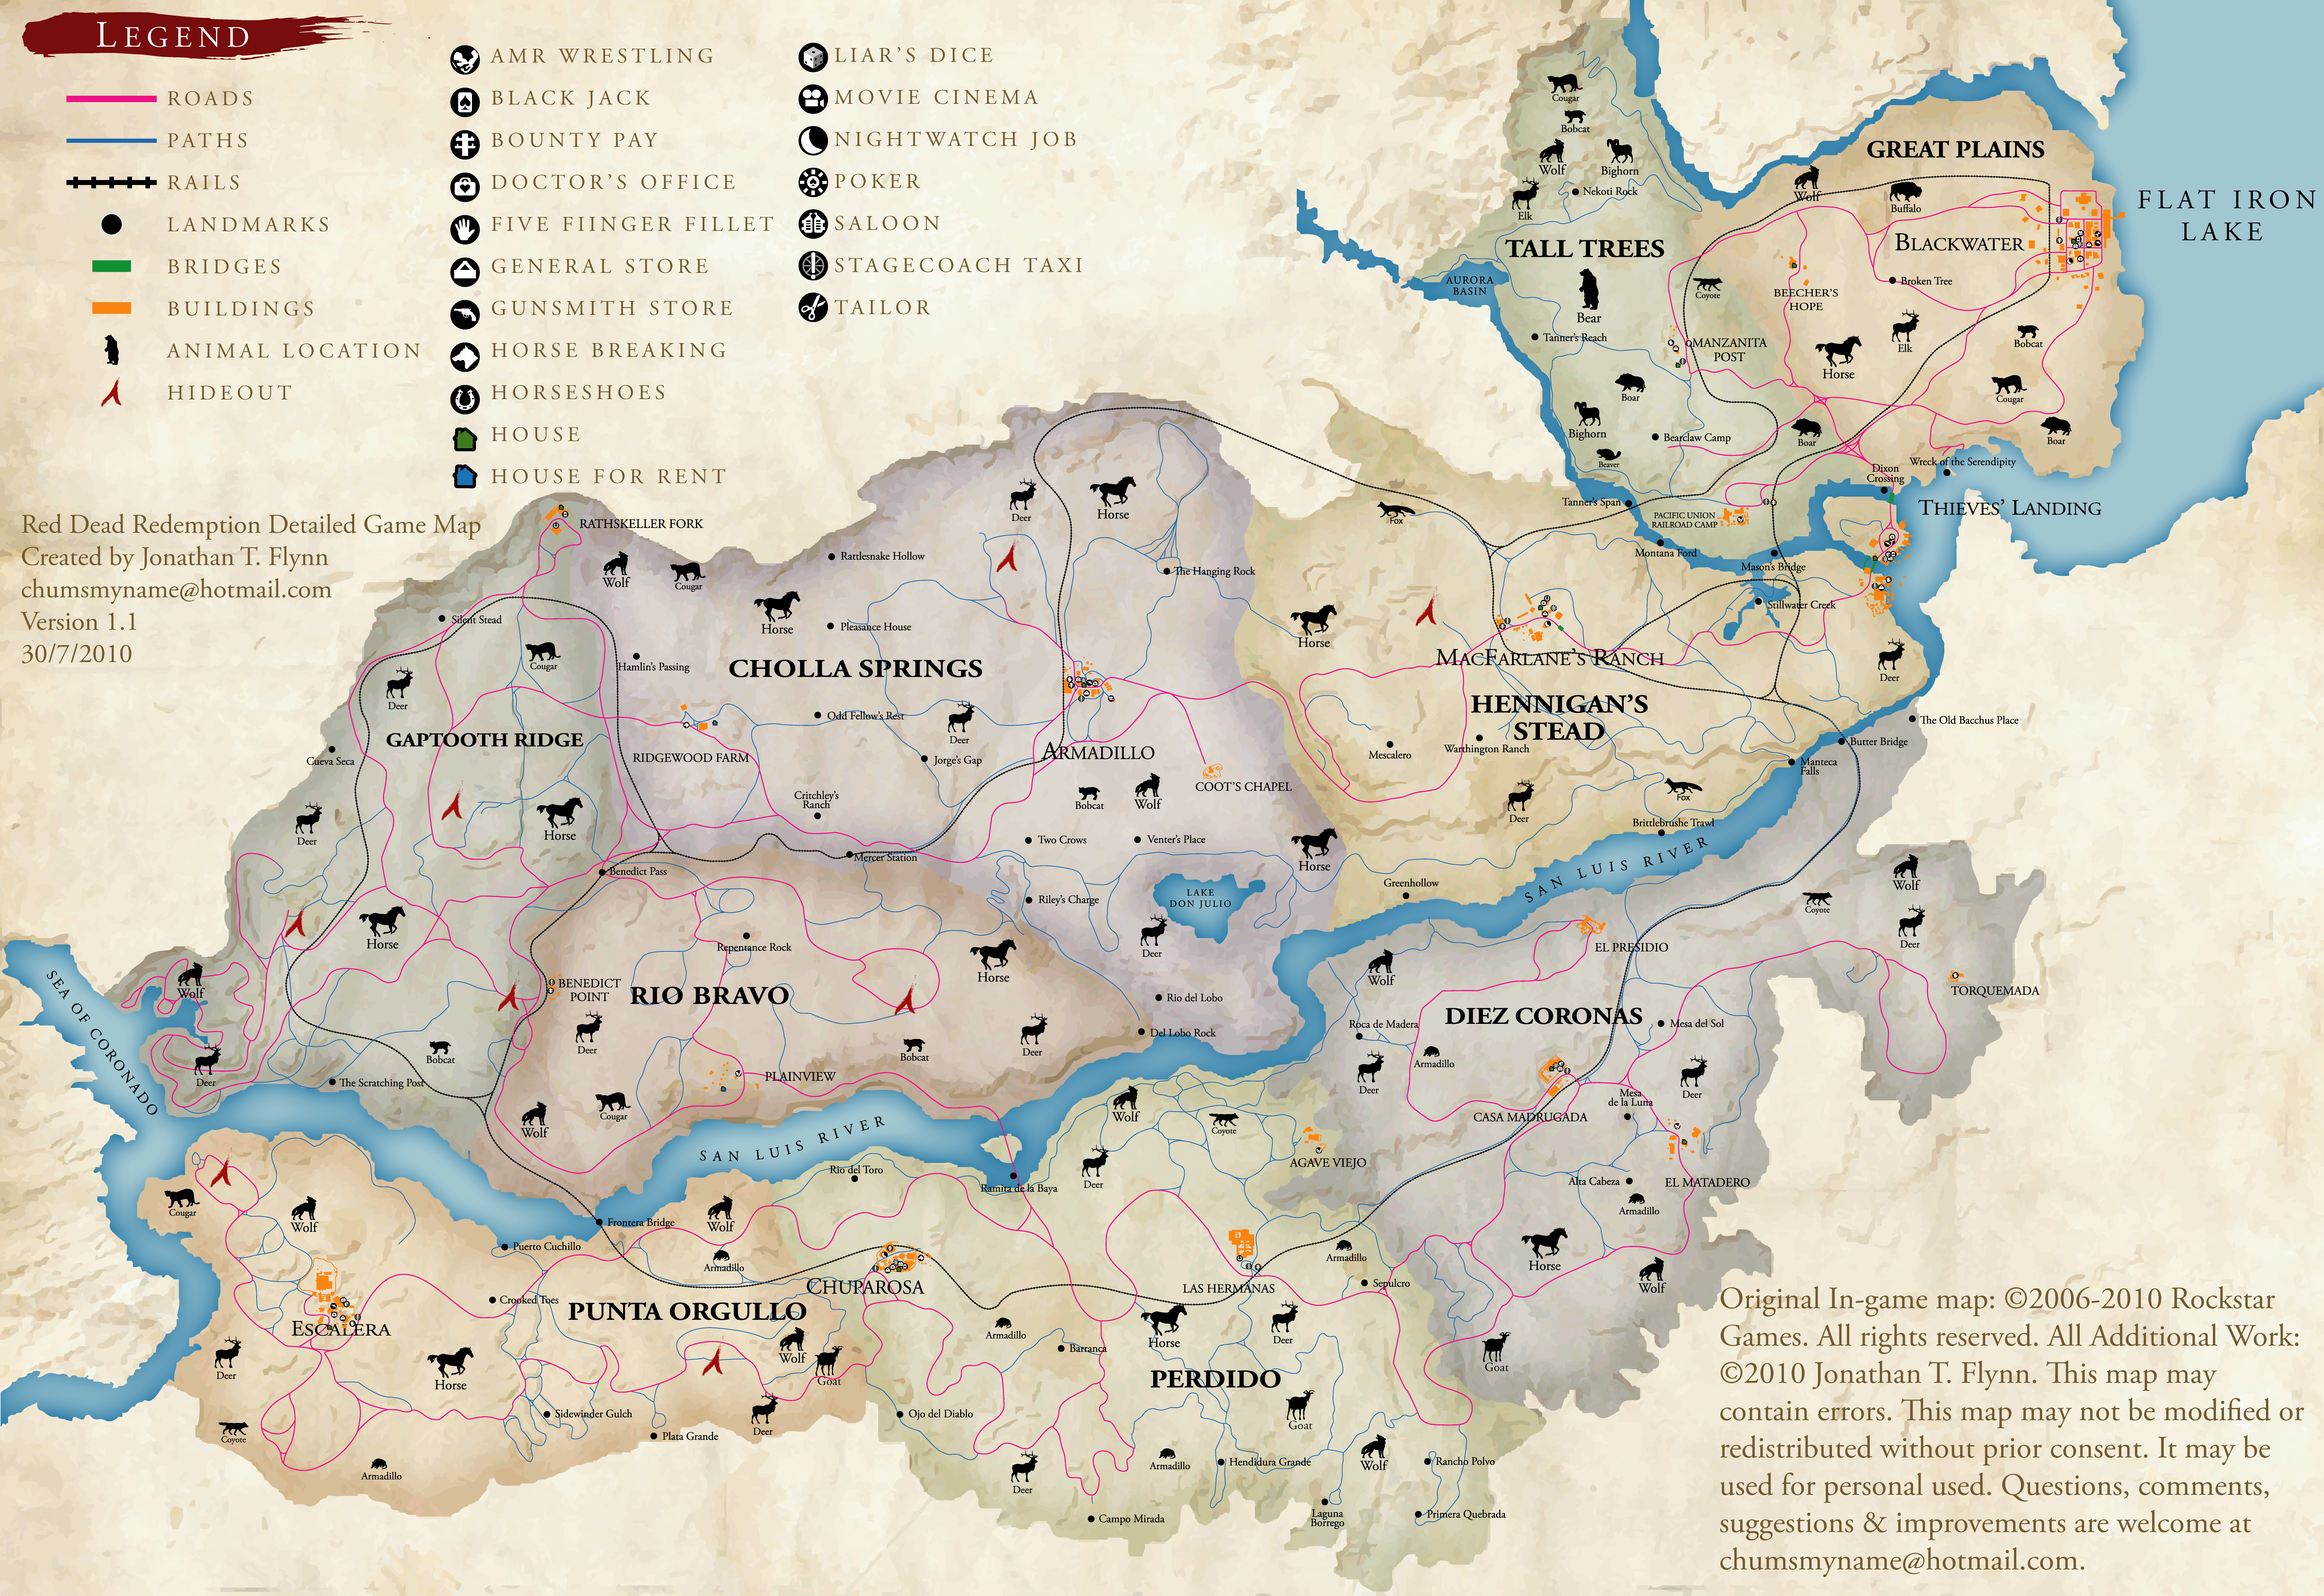 Red Dead Redemption 2 Map Comparison 10 Features We Desperately Want For Red Dead Redemption 2 - Gameranx